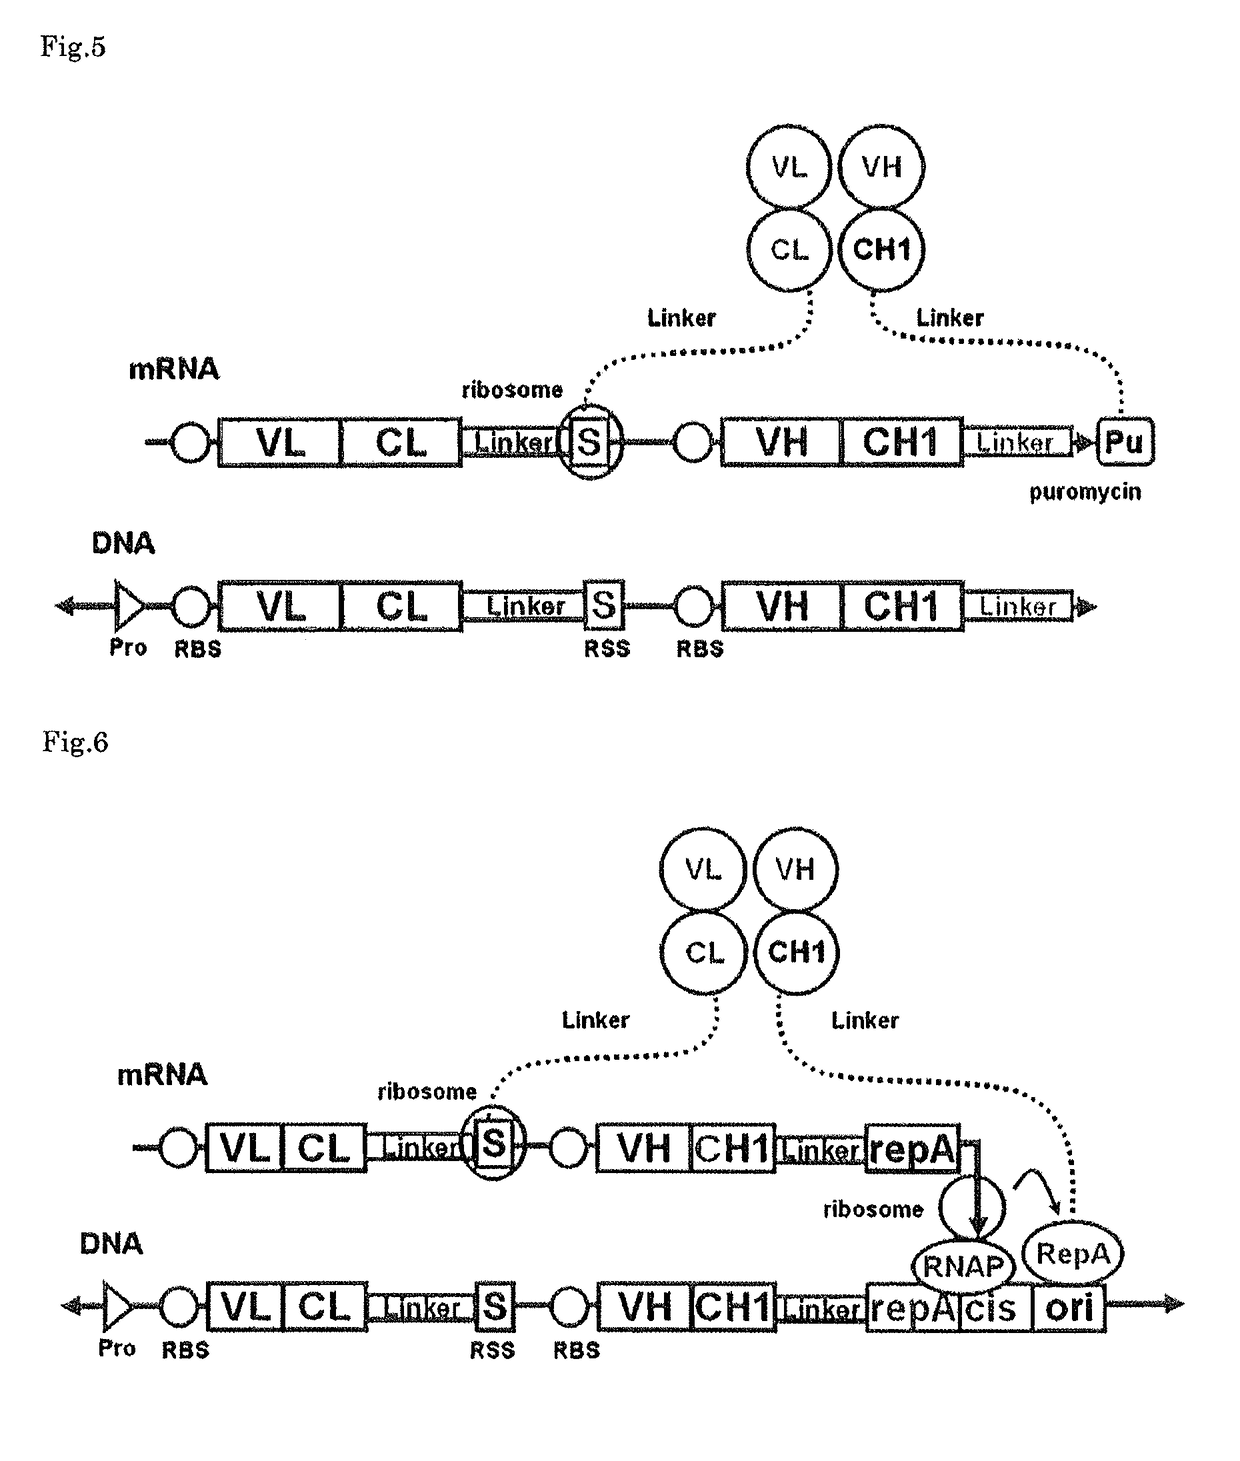 Polynucleotide construct capable of displaying fab in a cell-free translation system, and method for manufacturing and screening fab using same